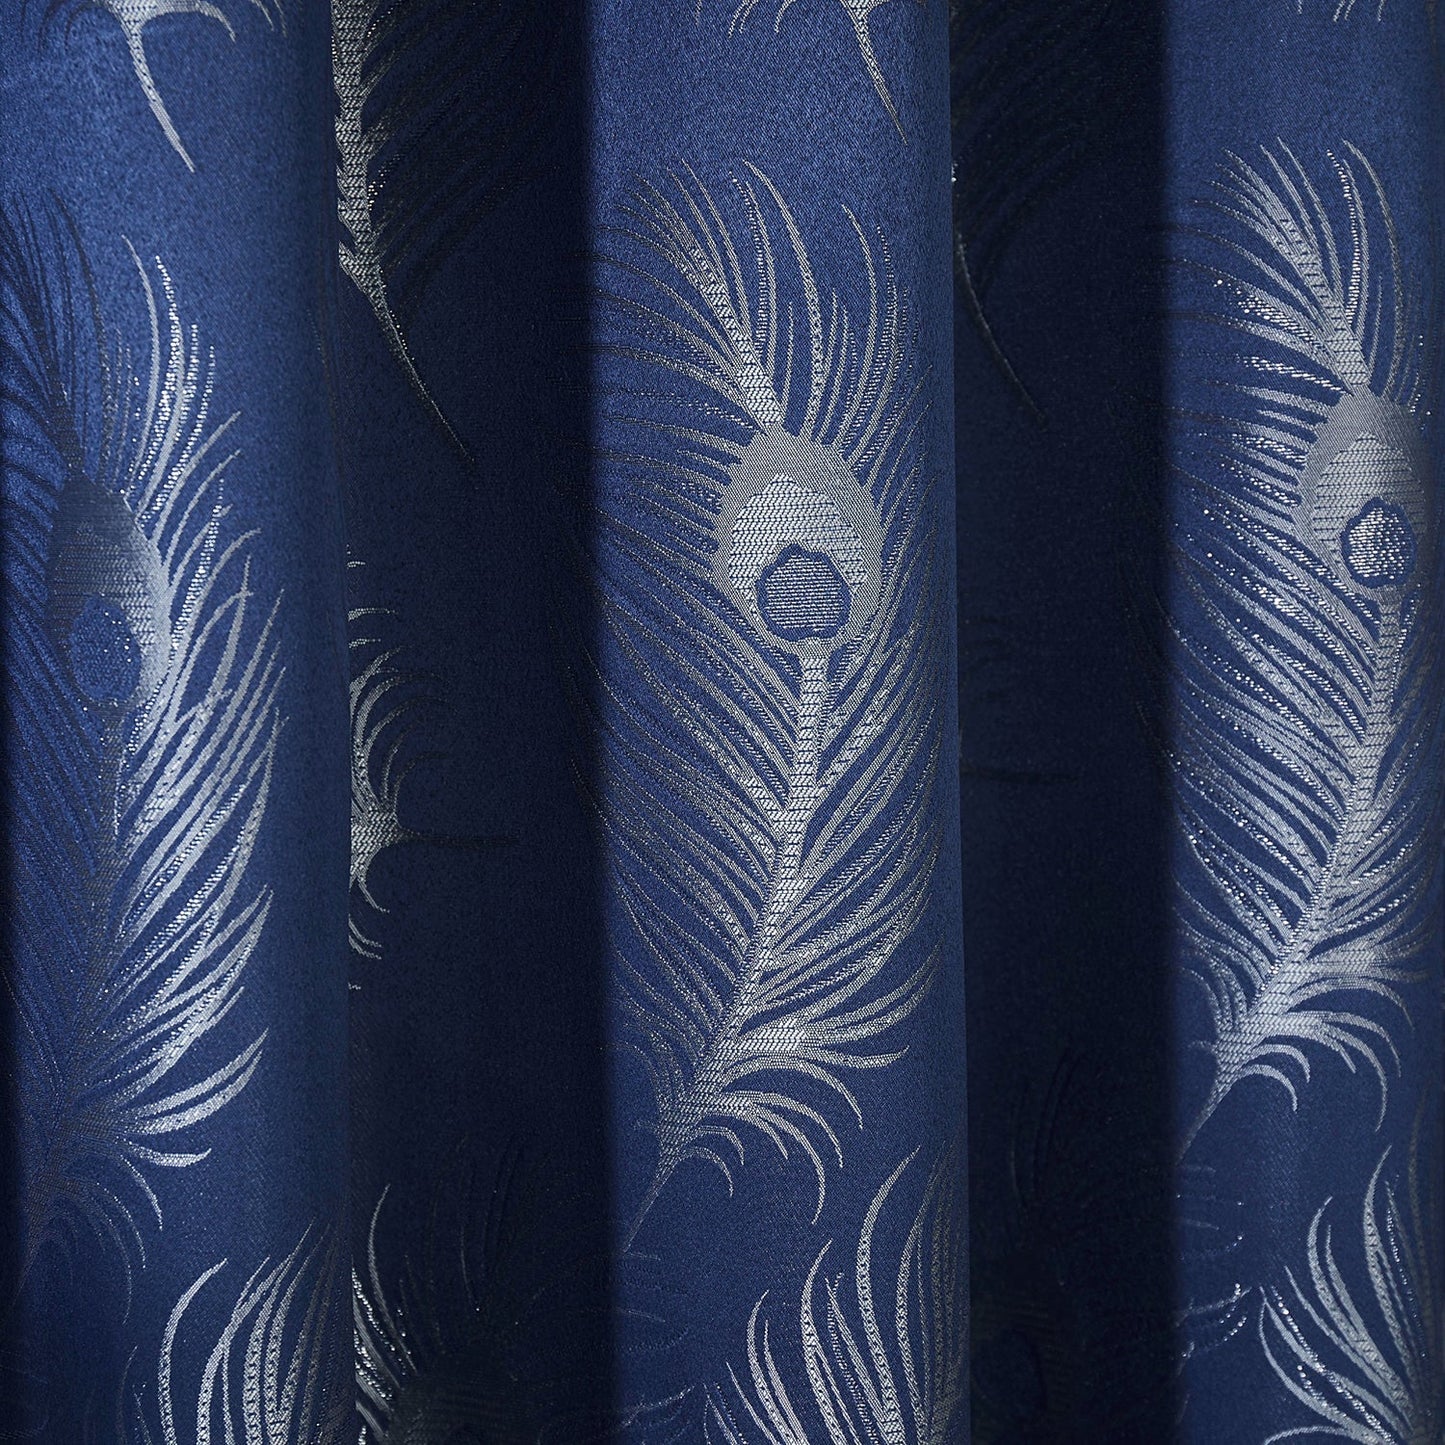 Feather Navy Blue Eyelet Curtains